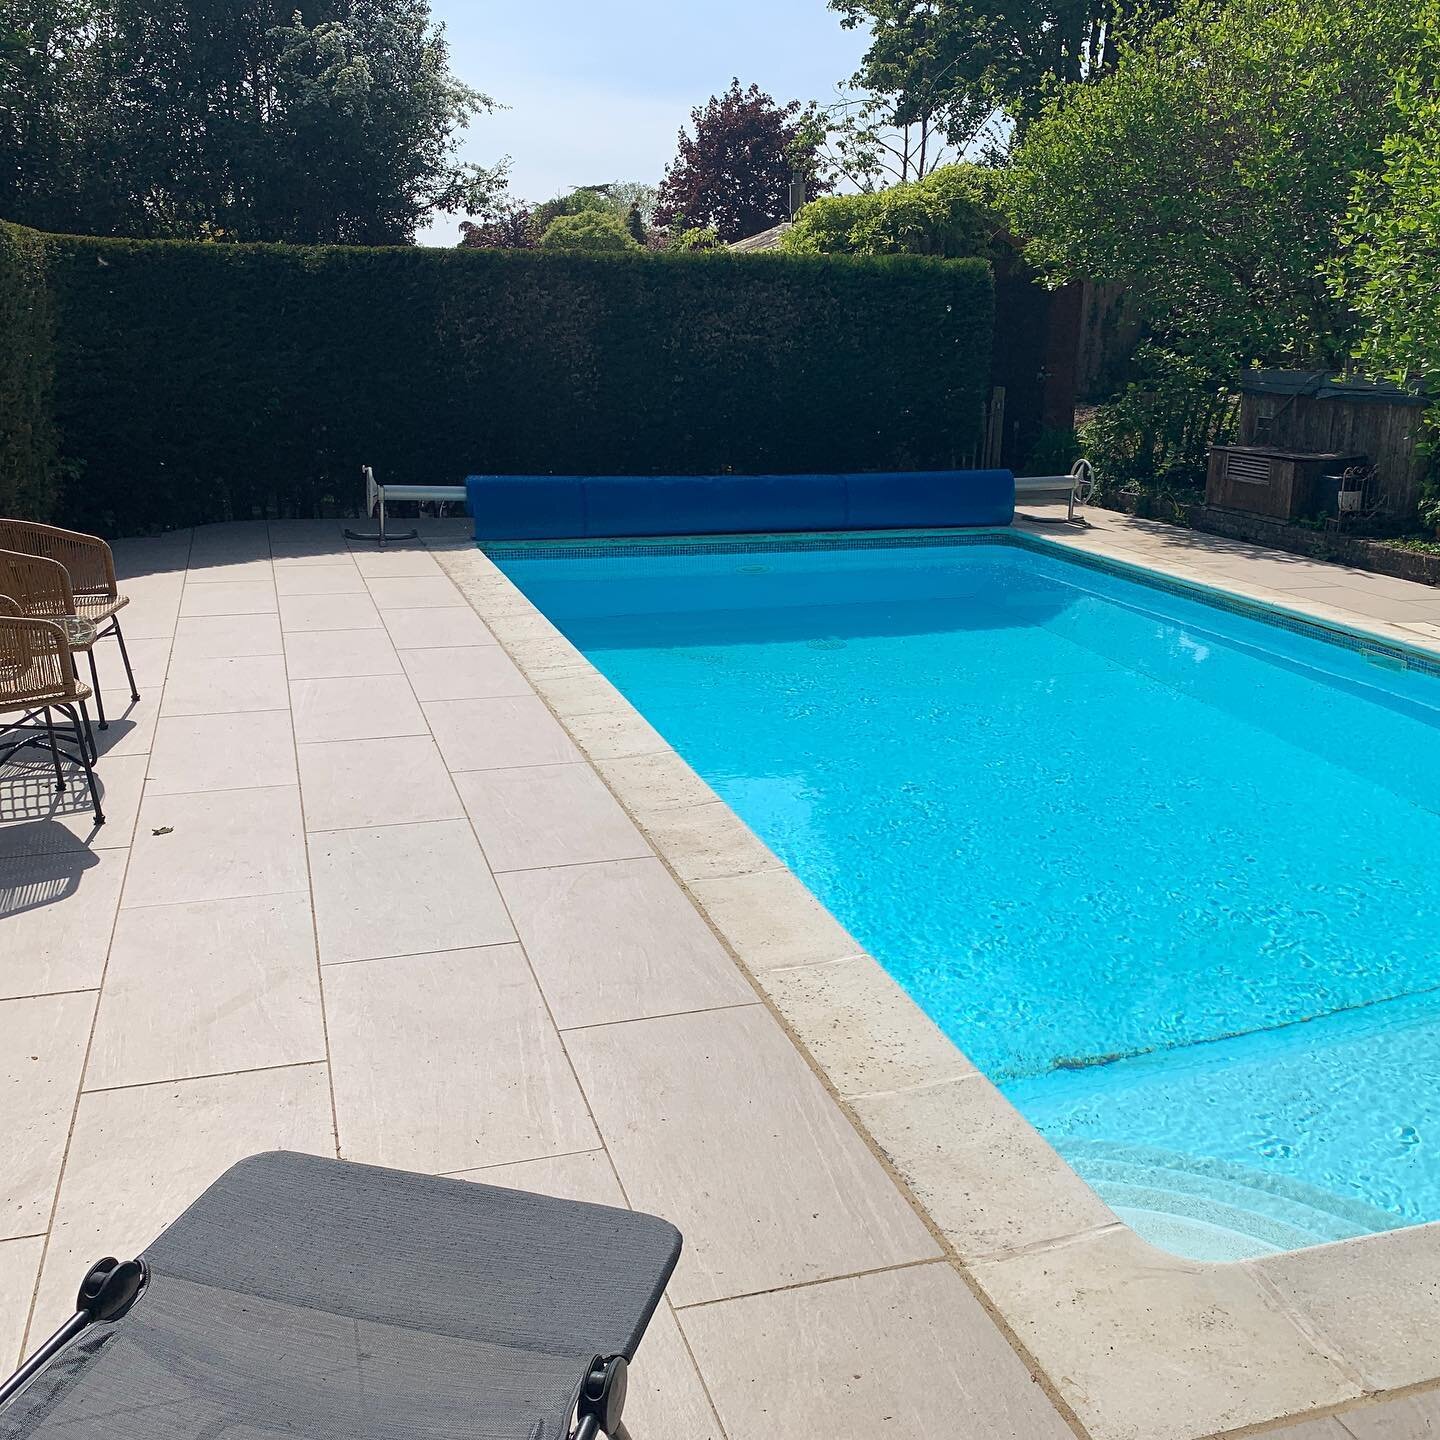 A little project I&rsquo;ve be working on.
Swimming pool surround updated with Italian sand porcelain paving supplied by @pnpavingsupplies 
Existing coping stones taken up &amp; relaid.